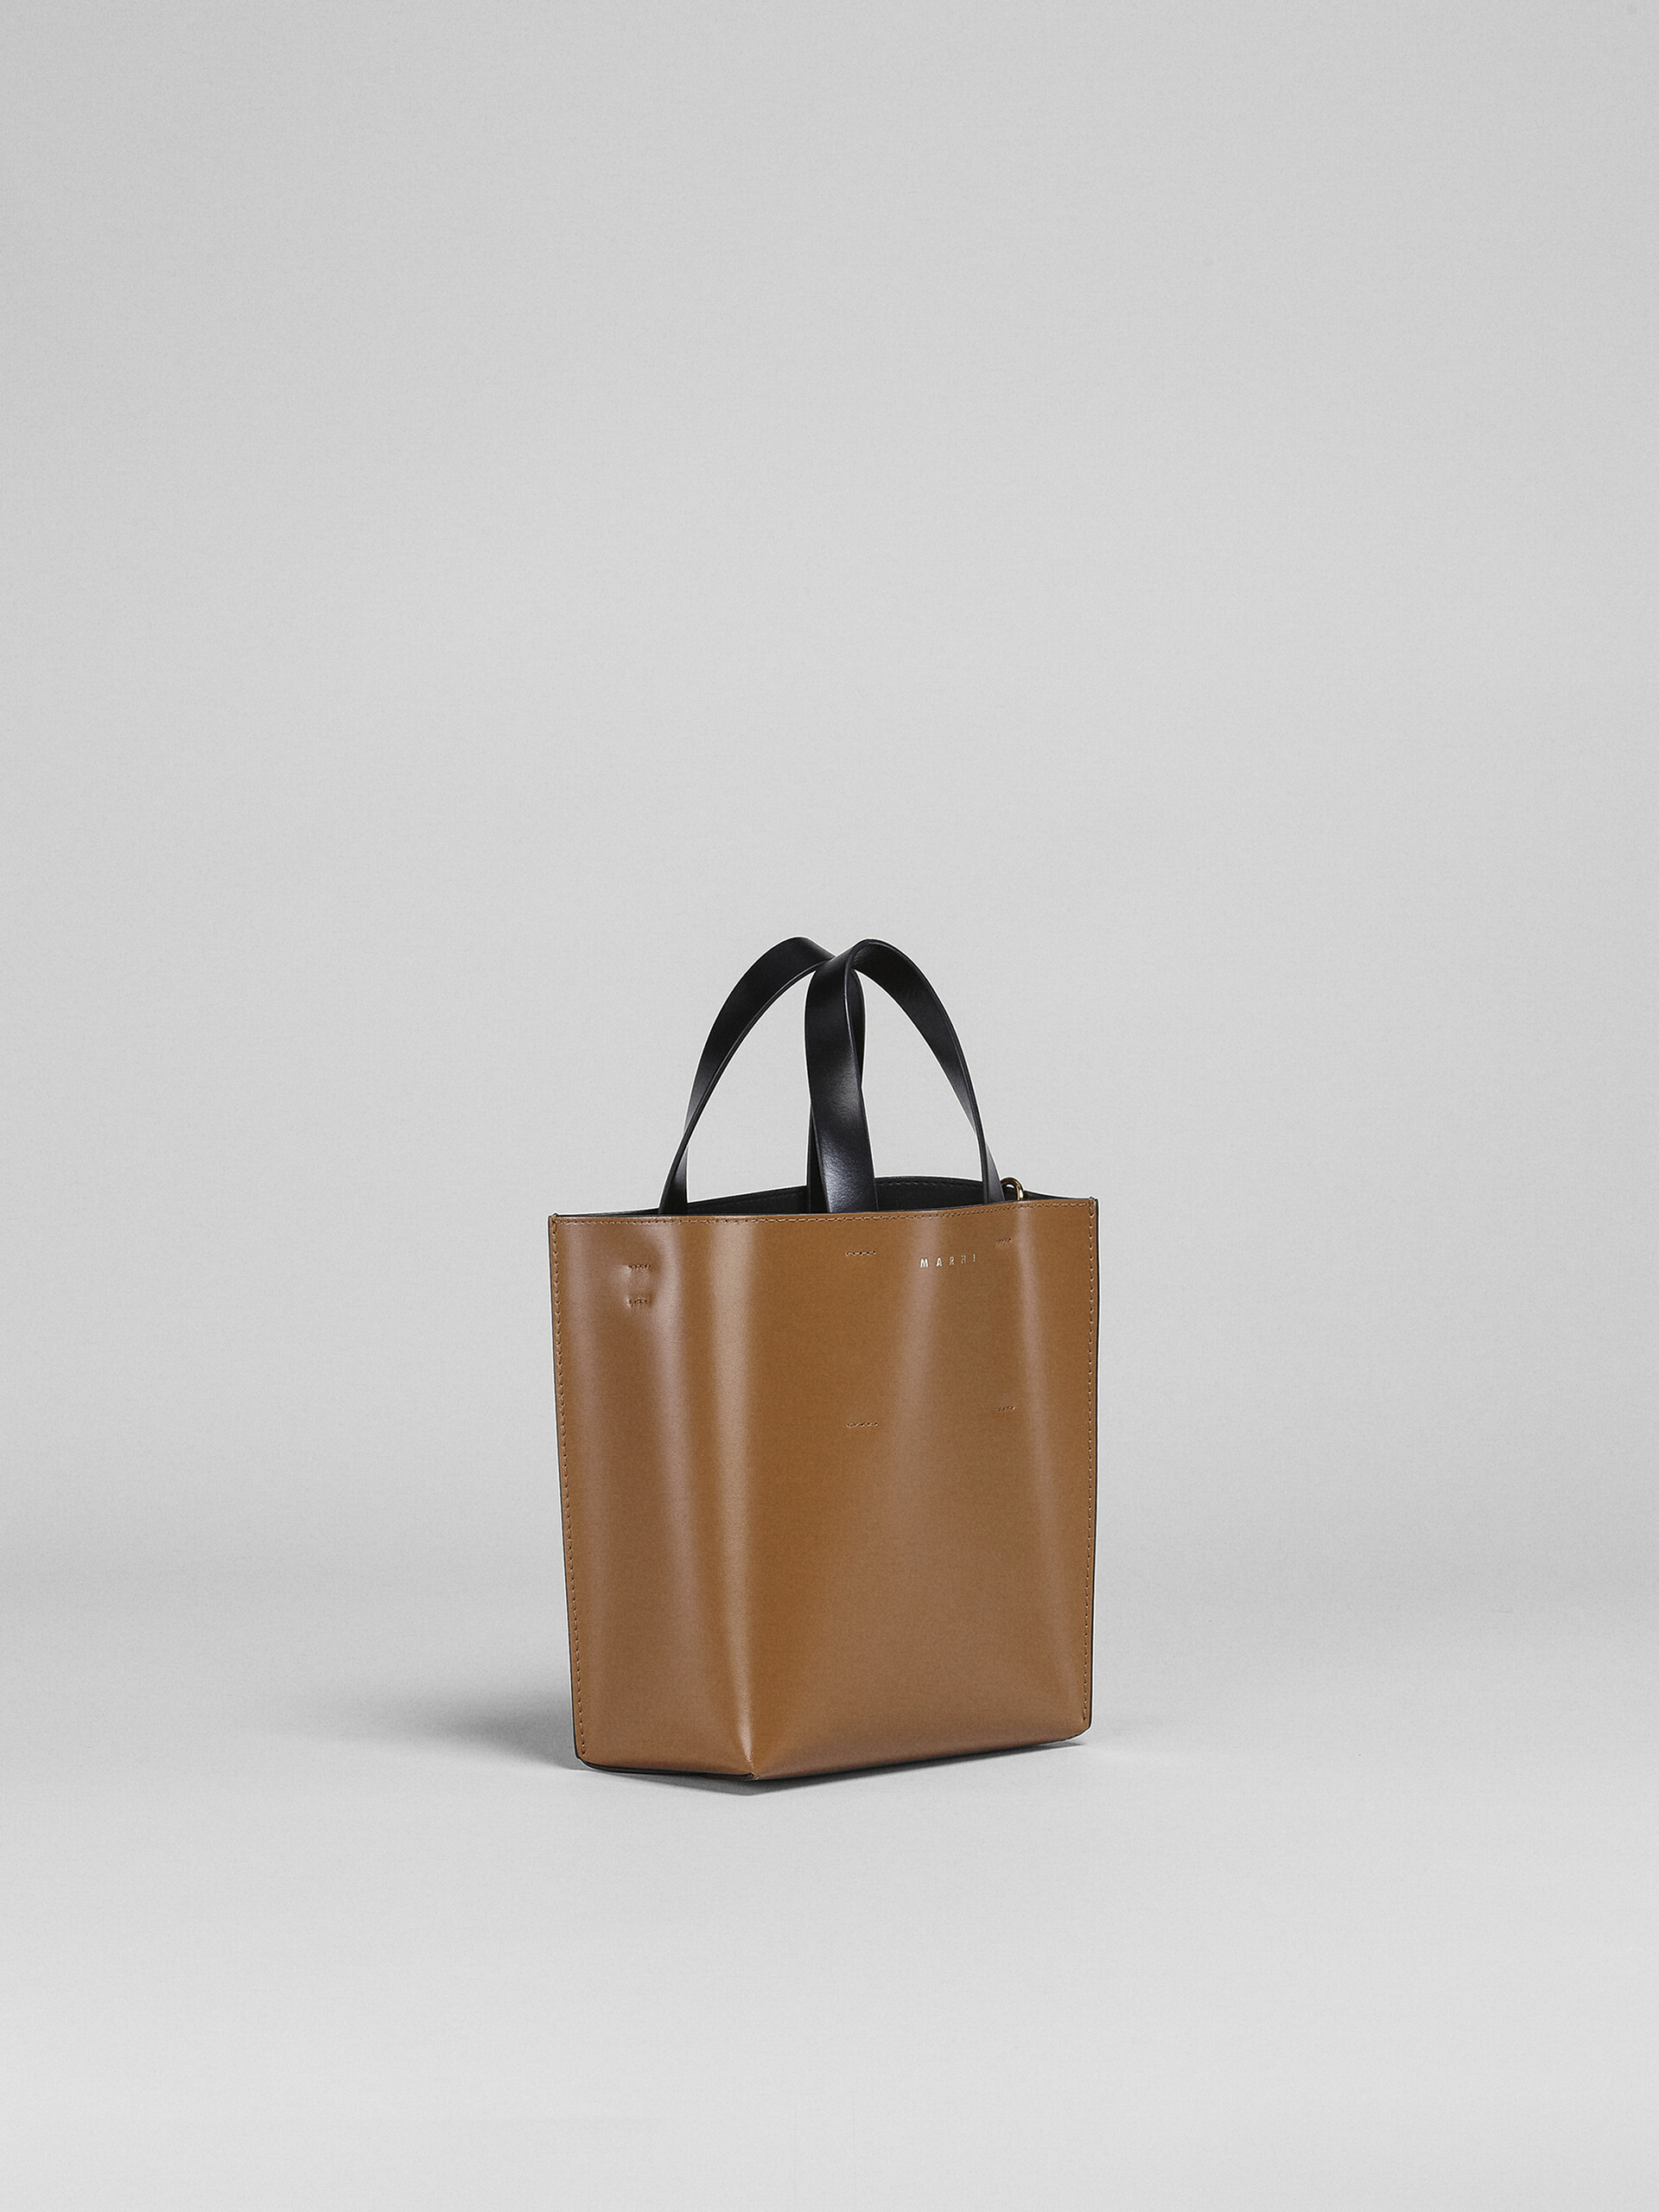 Museo Mini Bag in black and brown leather - Shopping Bags - Image 6